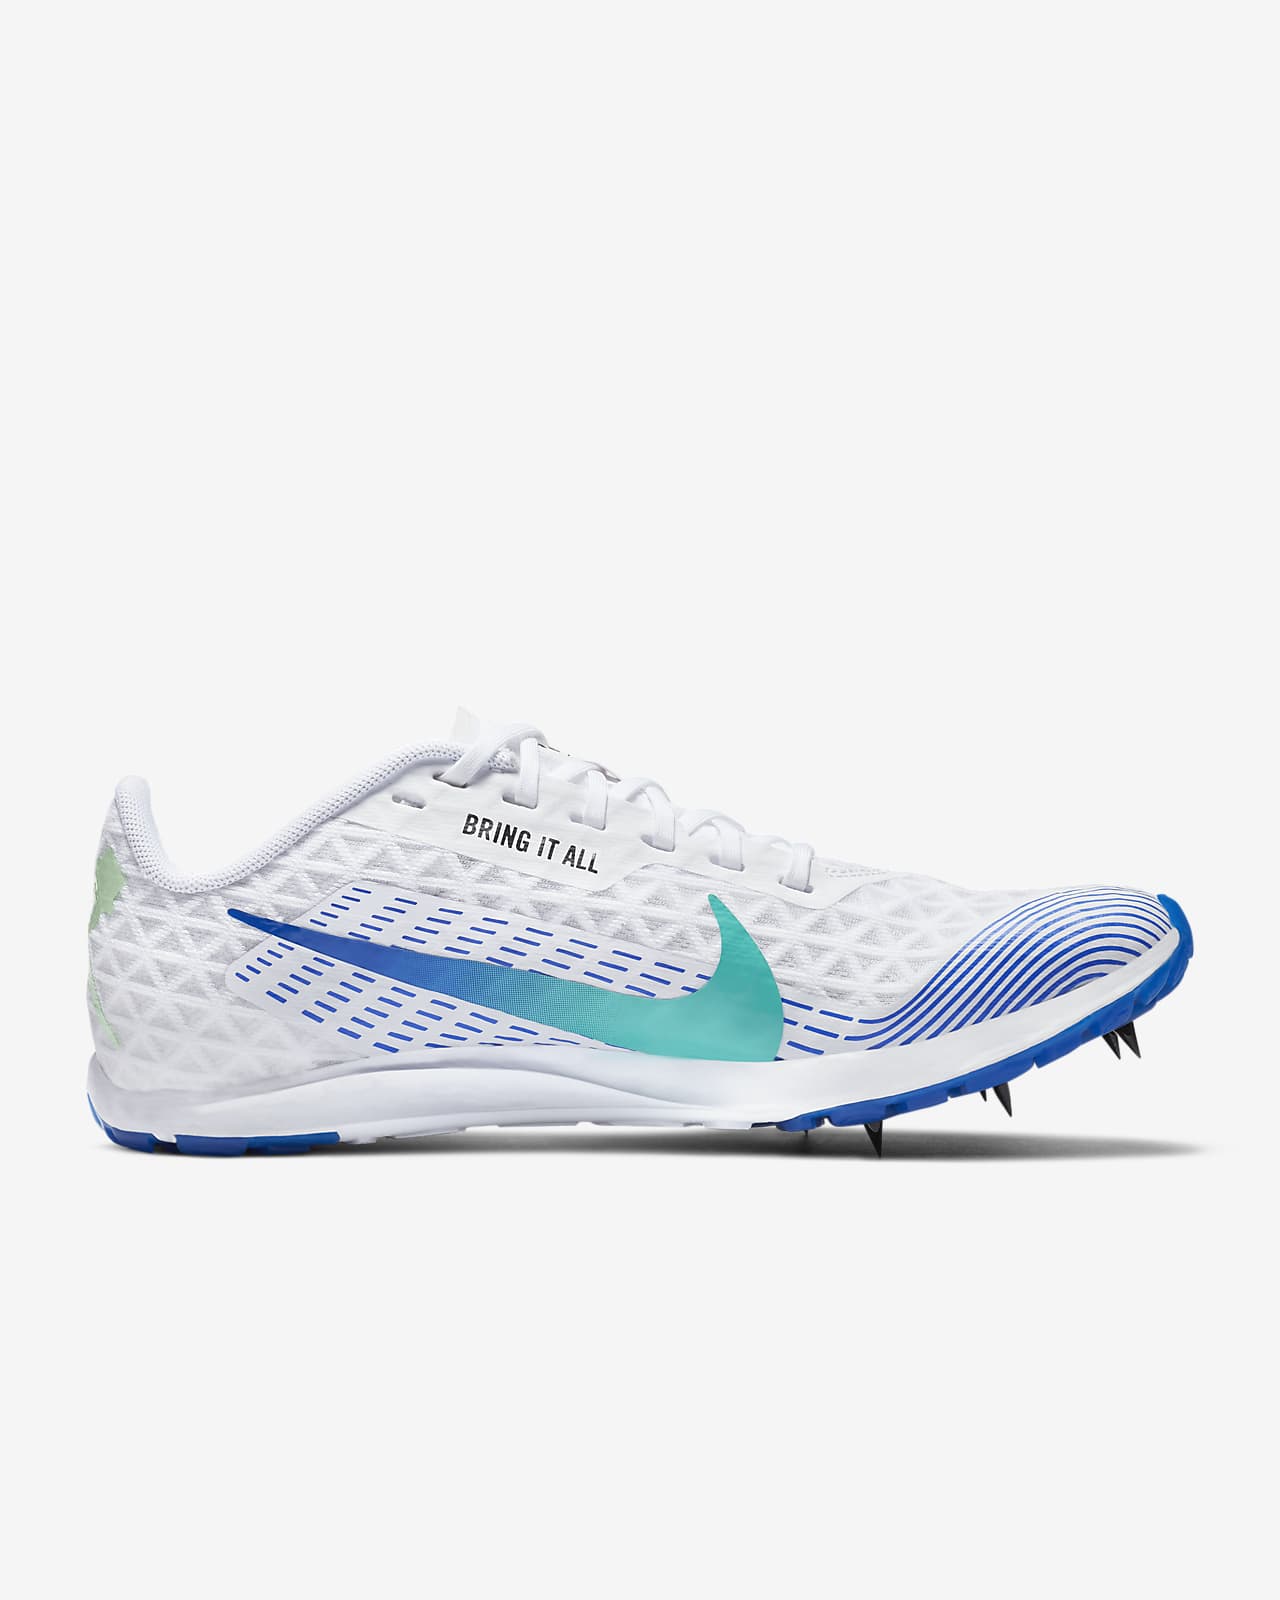 nike zoom rival cross country spikes